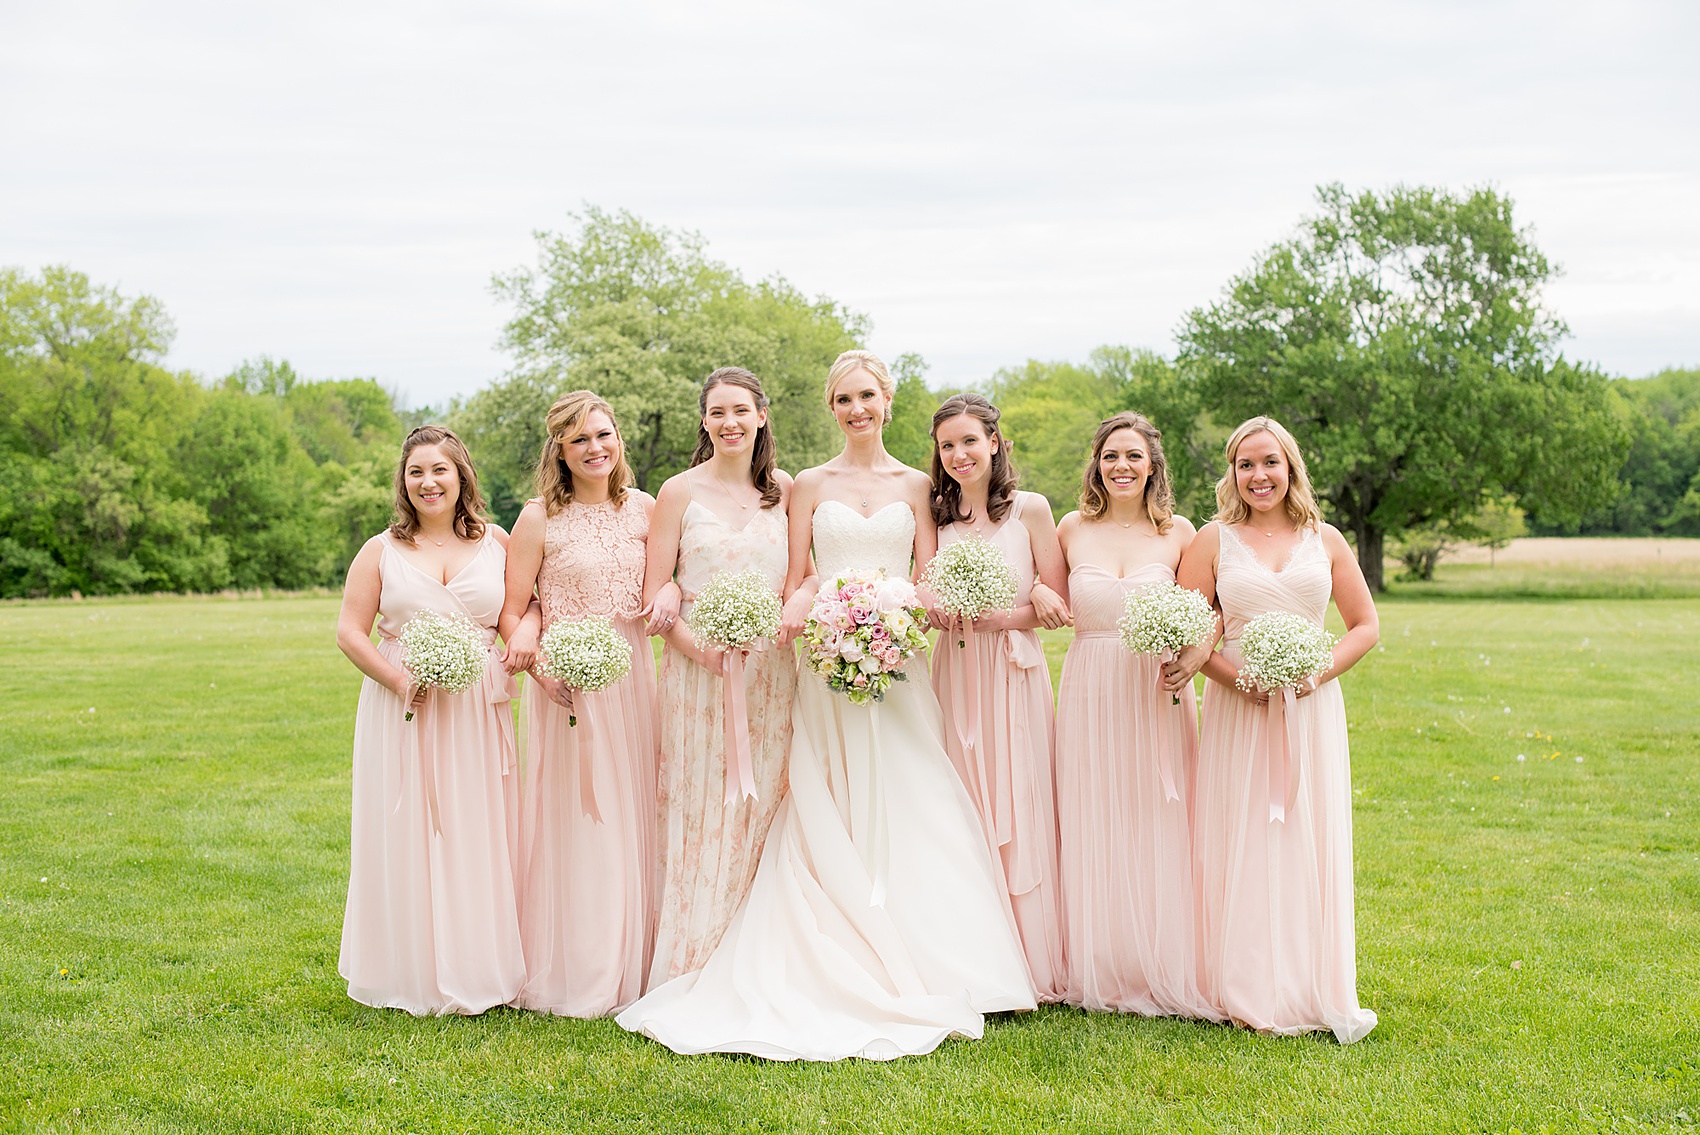 Waveny House wedding photos in Connecticut by Mikkel Paige Photography. Picture of the bride in a strapless gown with her bridesmaids in pink dresses, and maid of honor in a pink floral pattern gown. Bridesmaids held Baby's Breath bouquets.